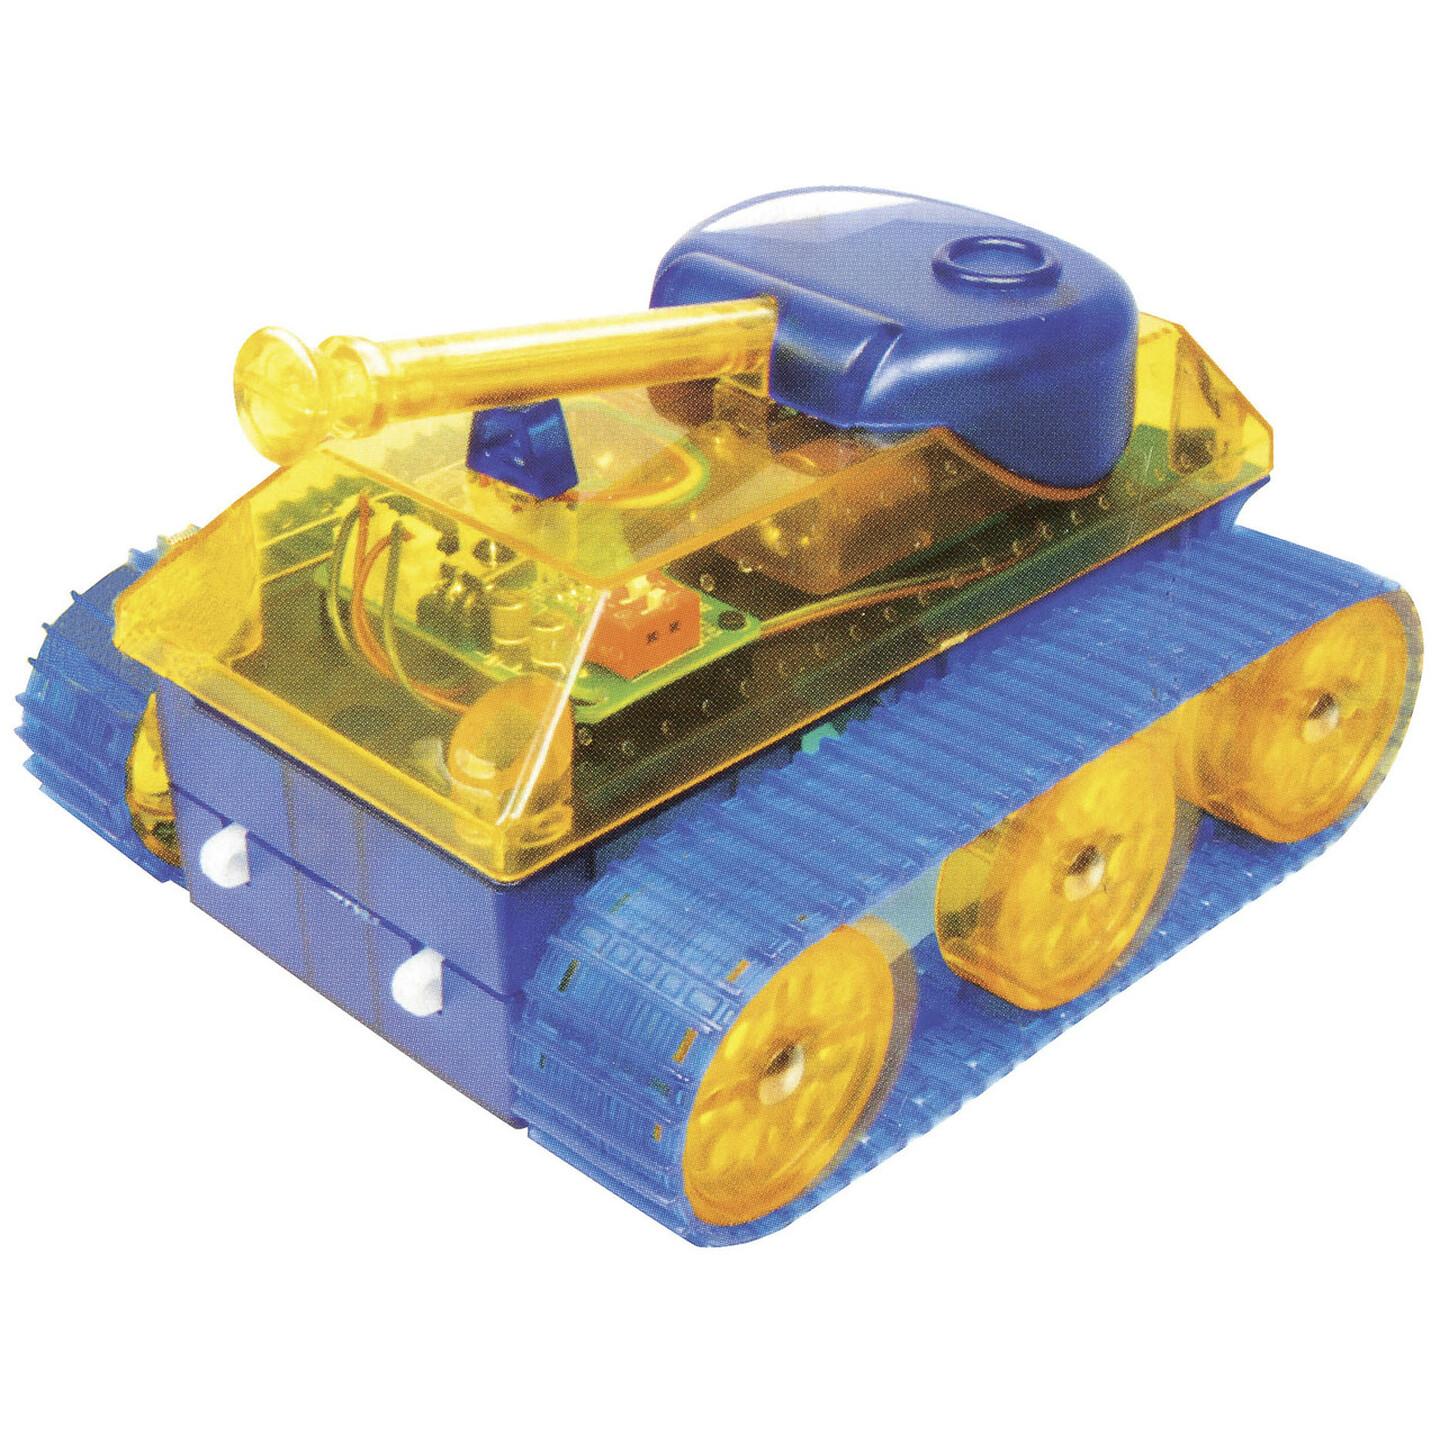 Remote Controlled Tank Kit